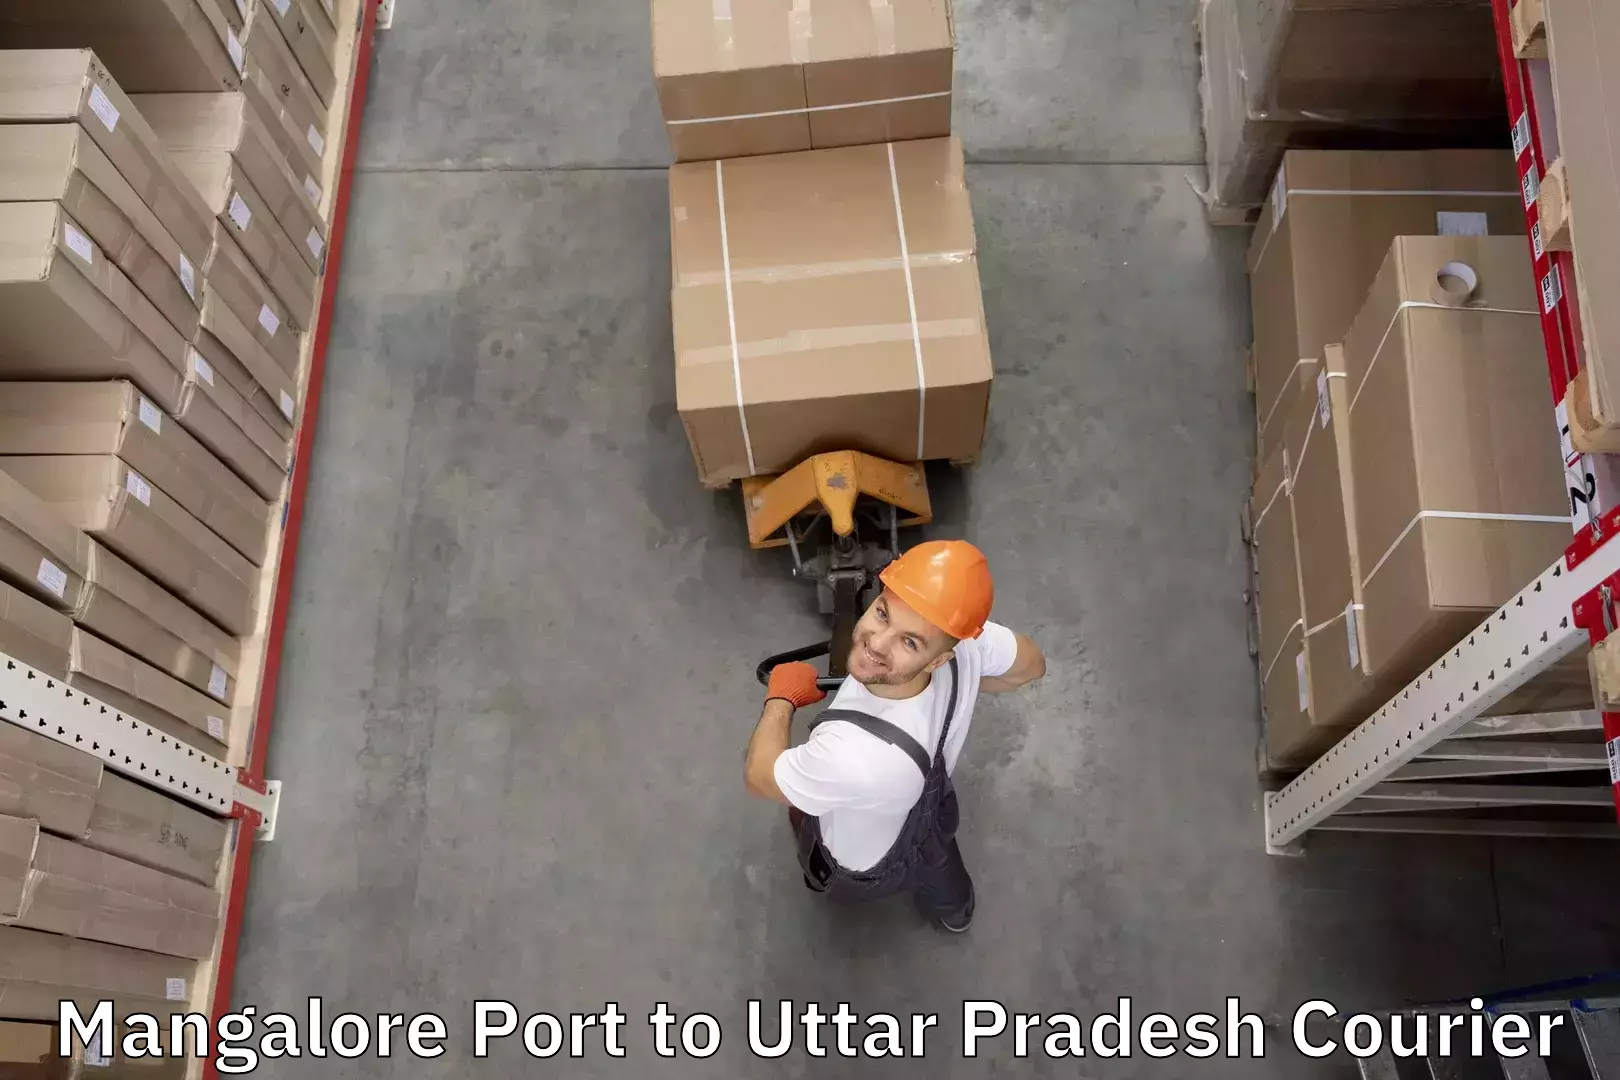 Baggage delivery technology Mangalore Port to Chopan